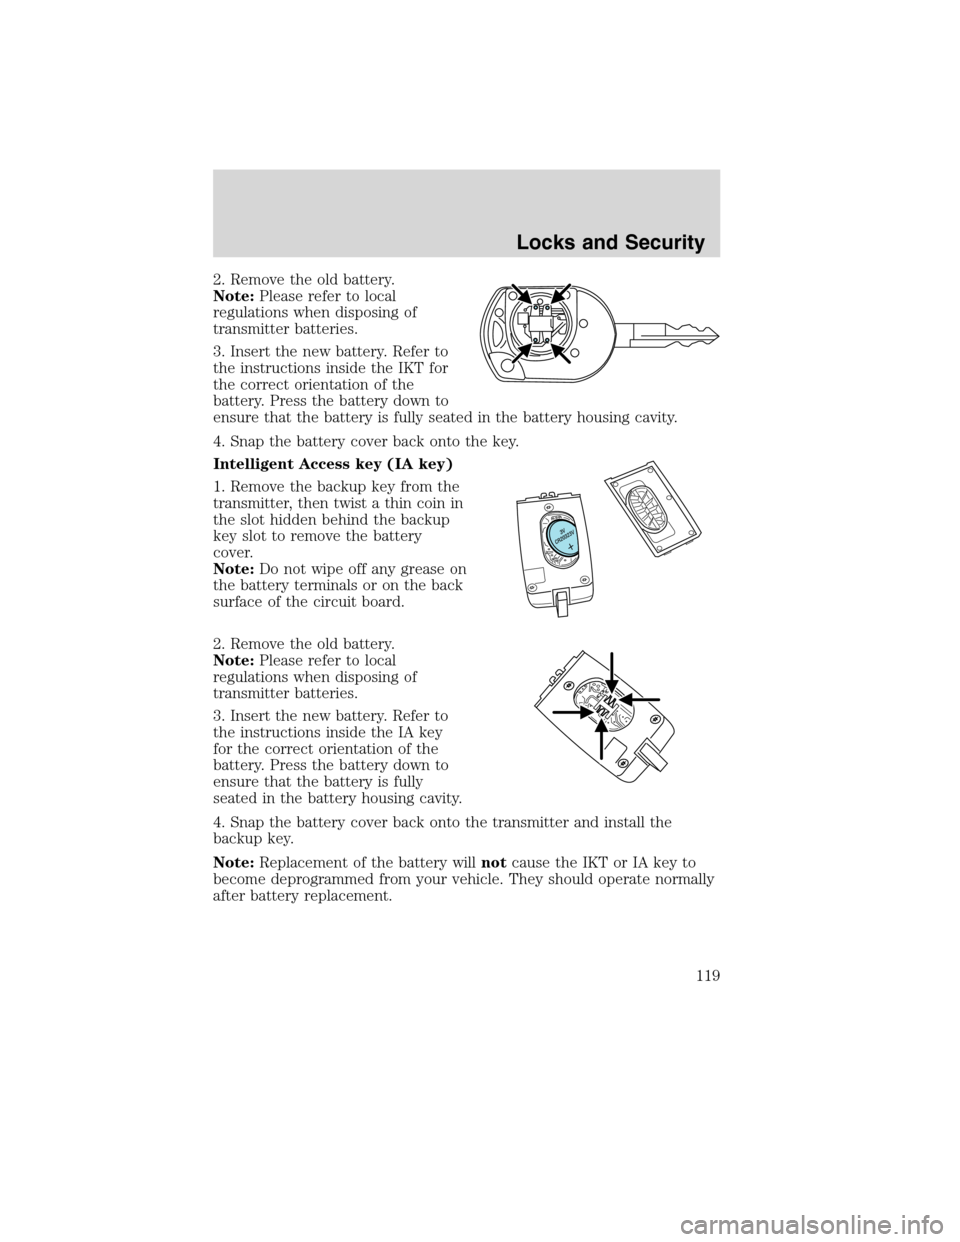 LINCOLN MKS 2010  Owners Manual 2. Remove the old battery.
Note:Please refer to local
regulations when disposing of
transmitter batteries.
3. Insert the new battery. Refer to
the instructions inside the IKT for
the correct orientati